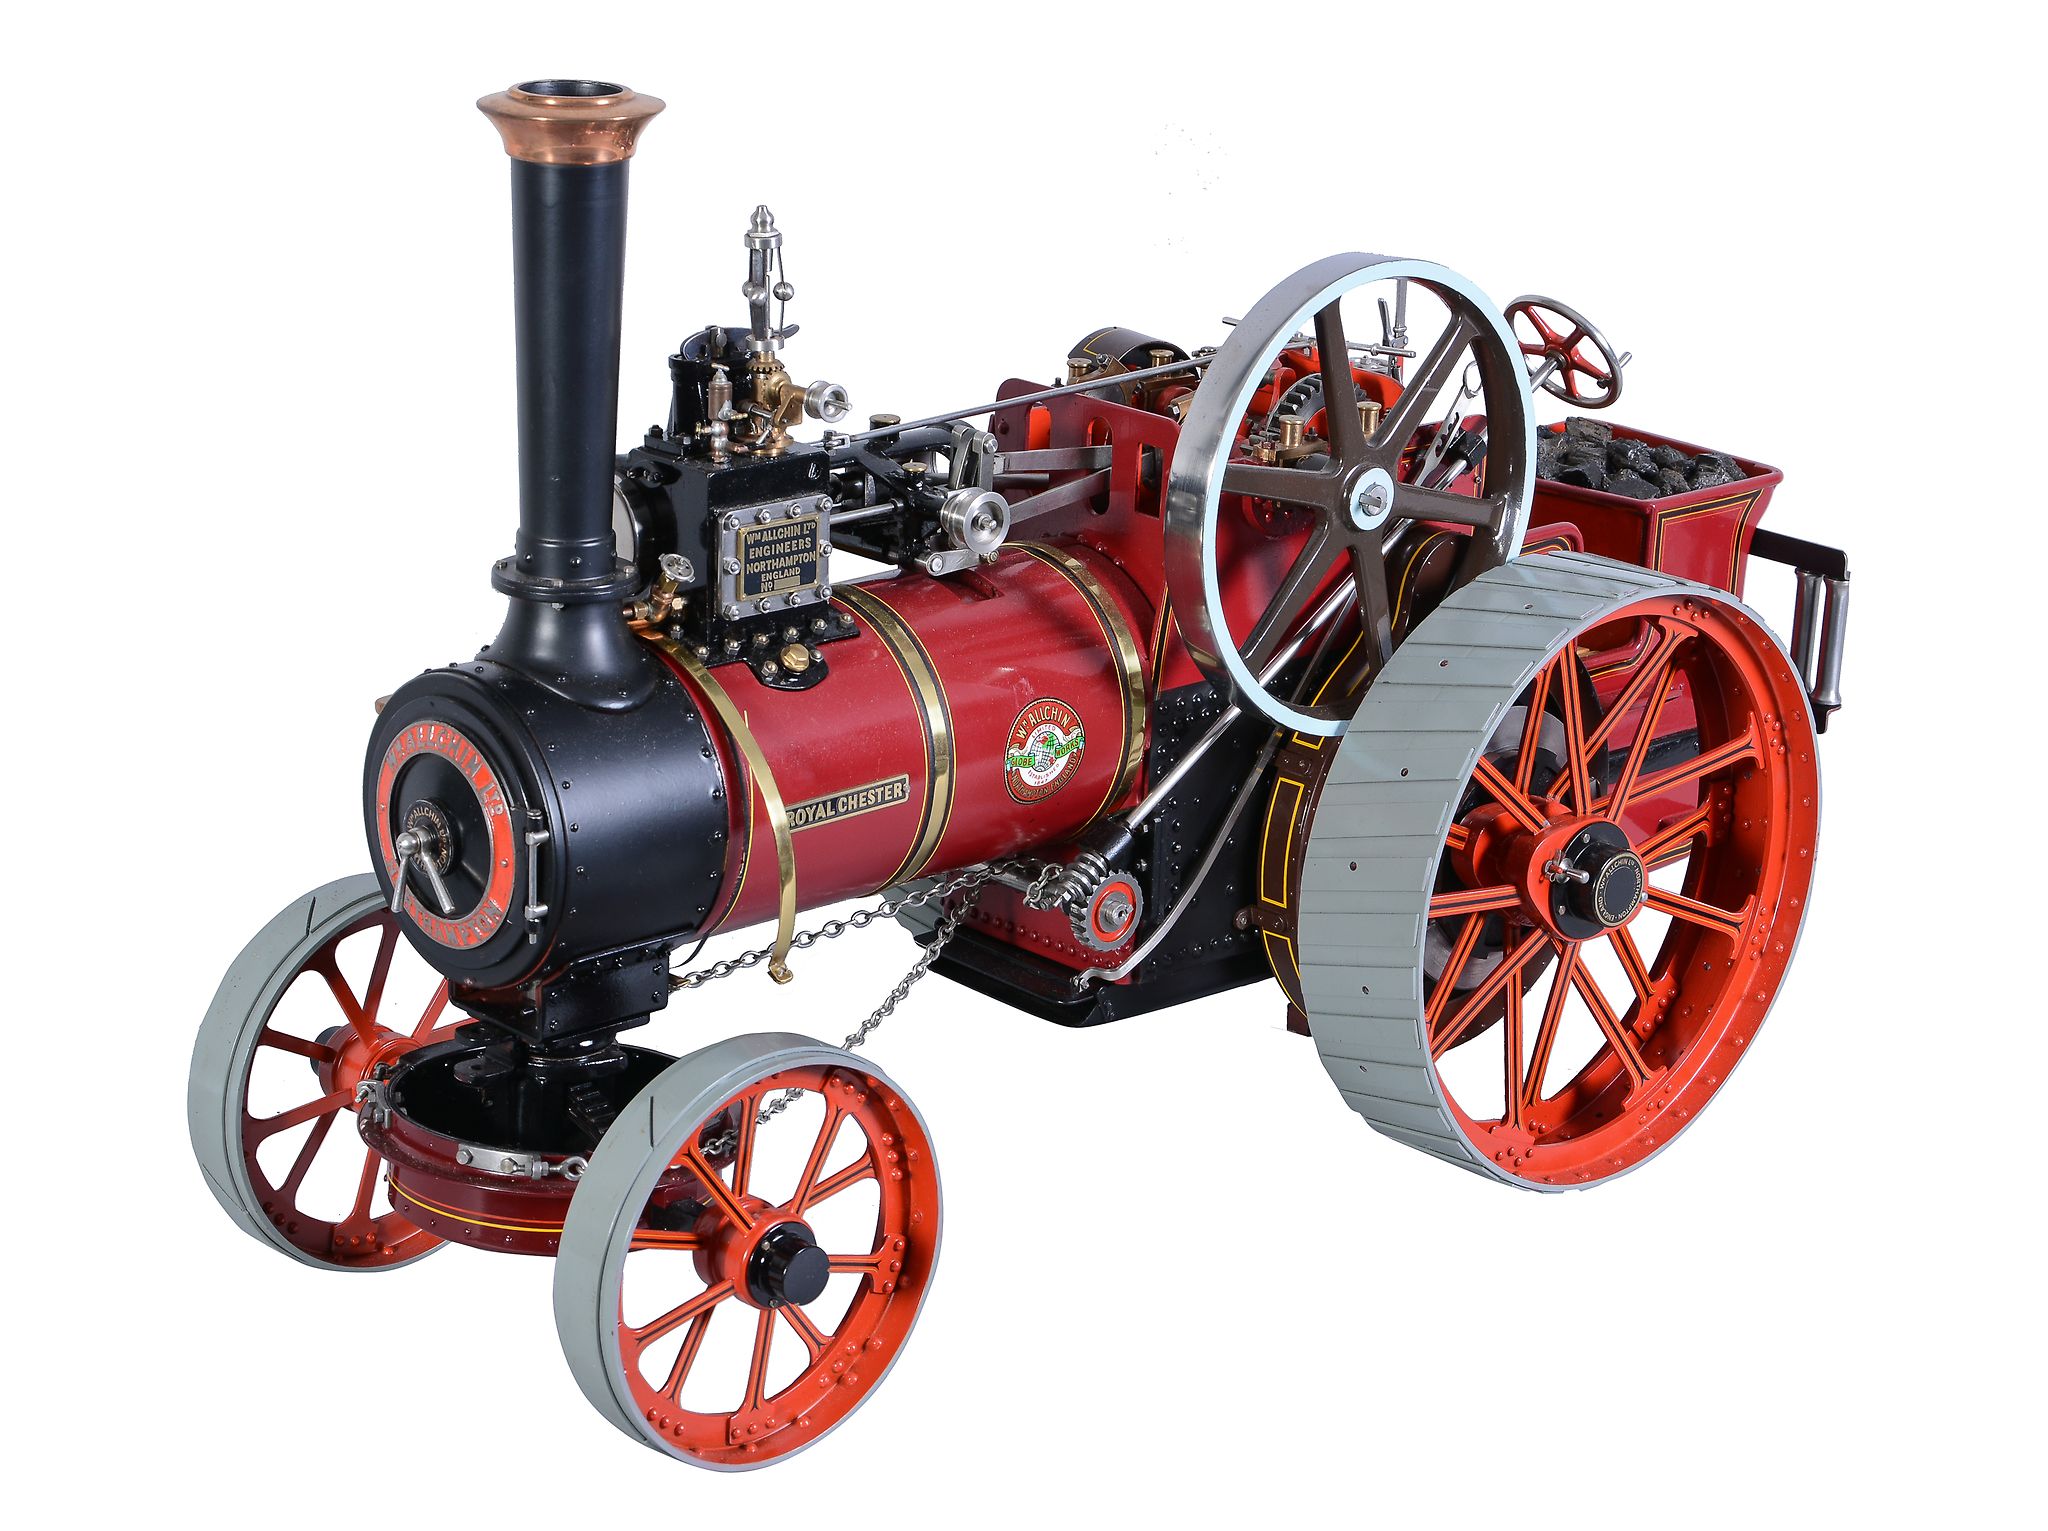 A well-engineered 1 Â½ inch scale model of a 'Royal Chester' Allchin Traction engine, built by the